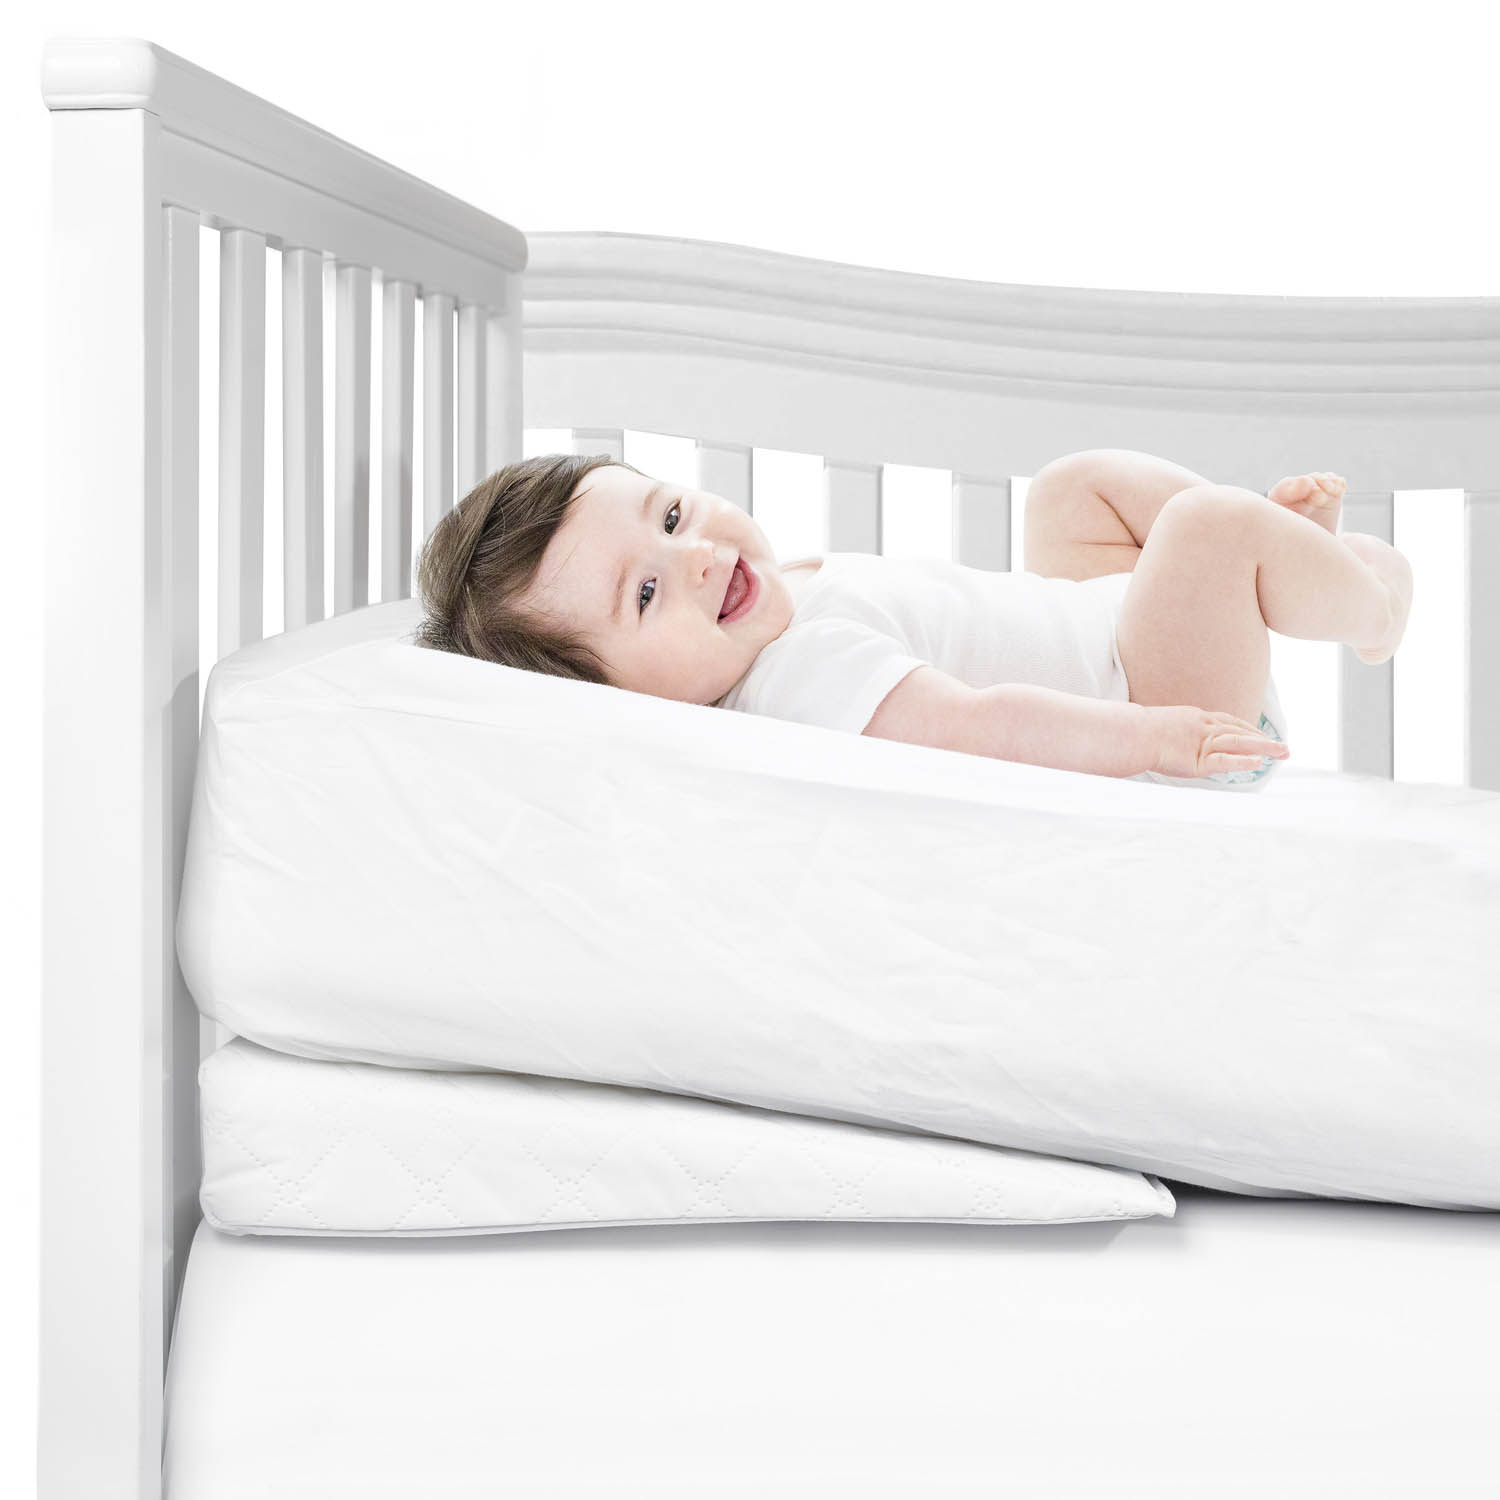 When to Use a Cradle Bed Sleeping Wedge - 5 Pgs. of Q&A